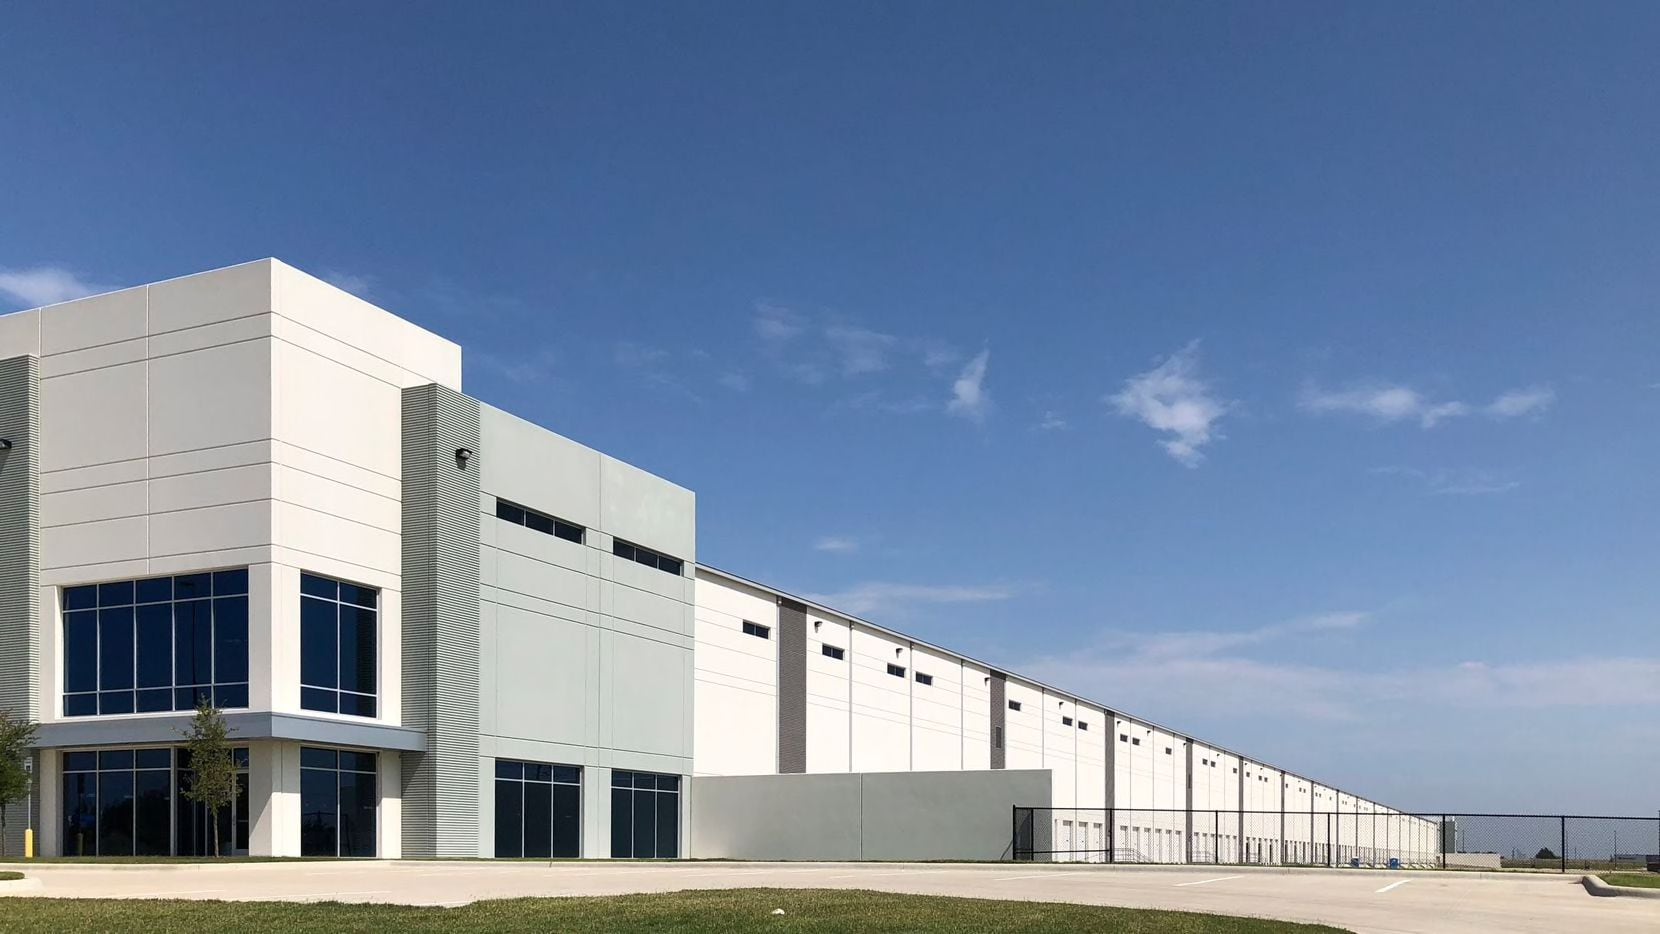 KKR recently purchased  the Southlink Logistics Center building near I-20 in Southern Dallas...